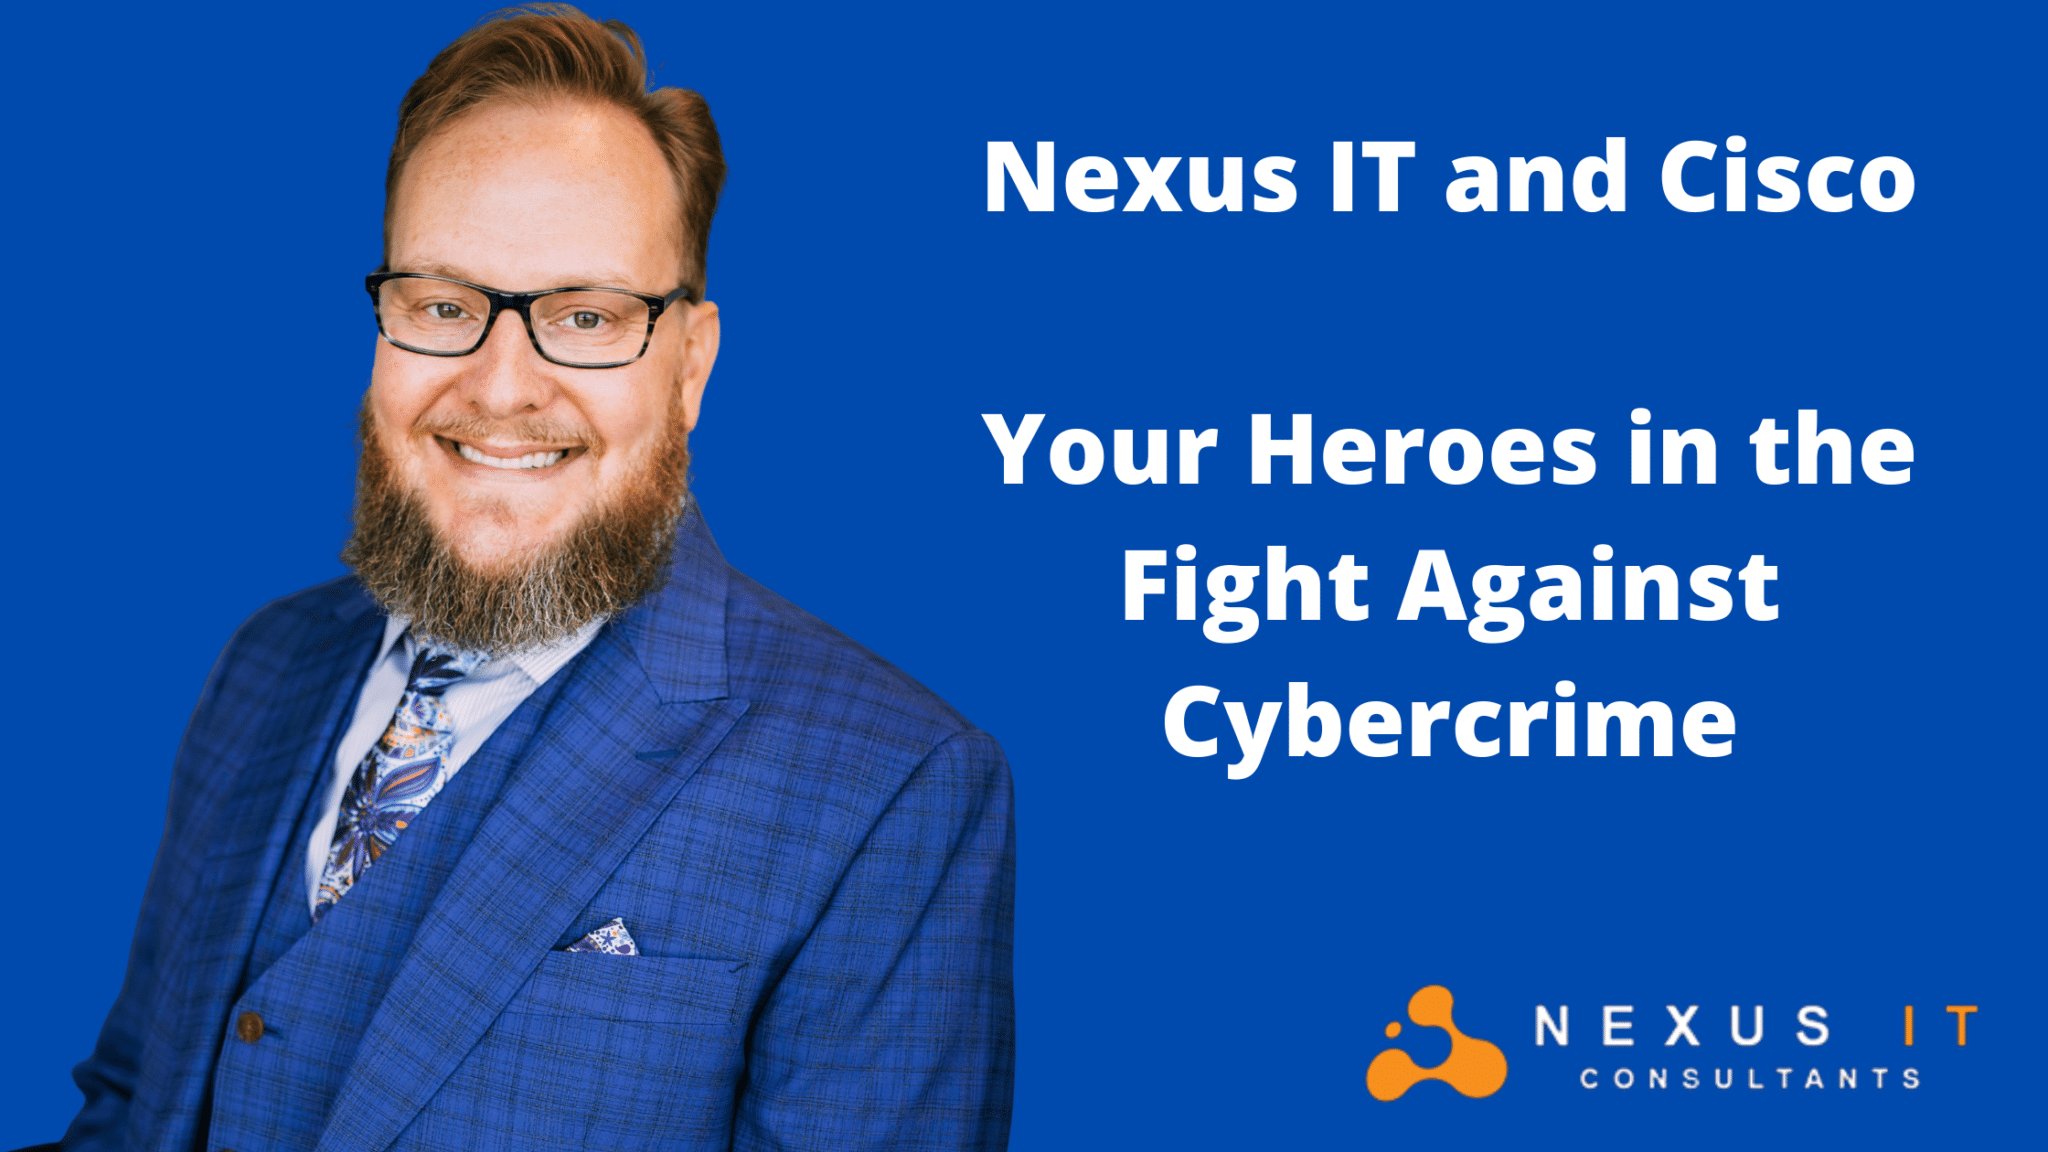 Nexus IT and Cisco: Your Heroes in the Fight Against Cybercrime